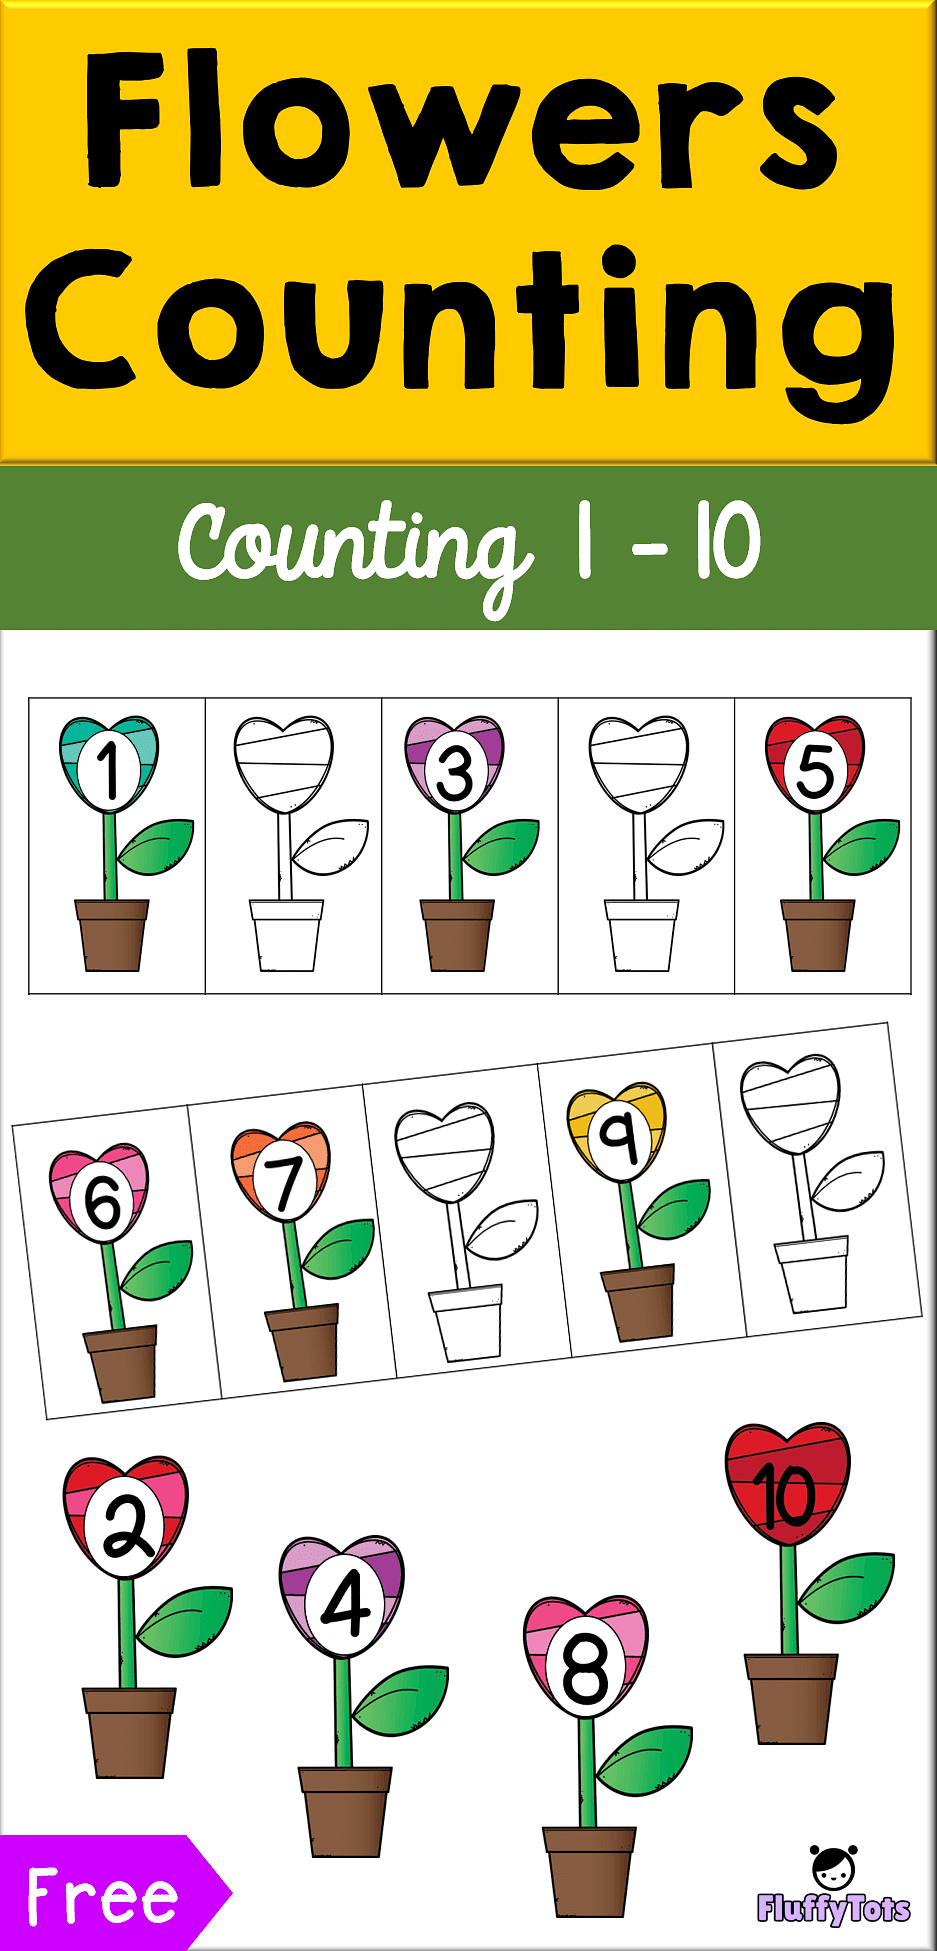 Flowers counting printables